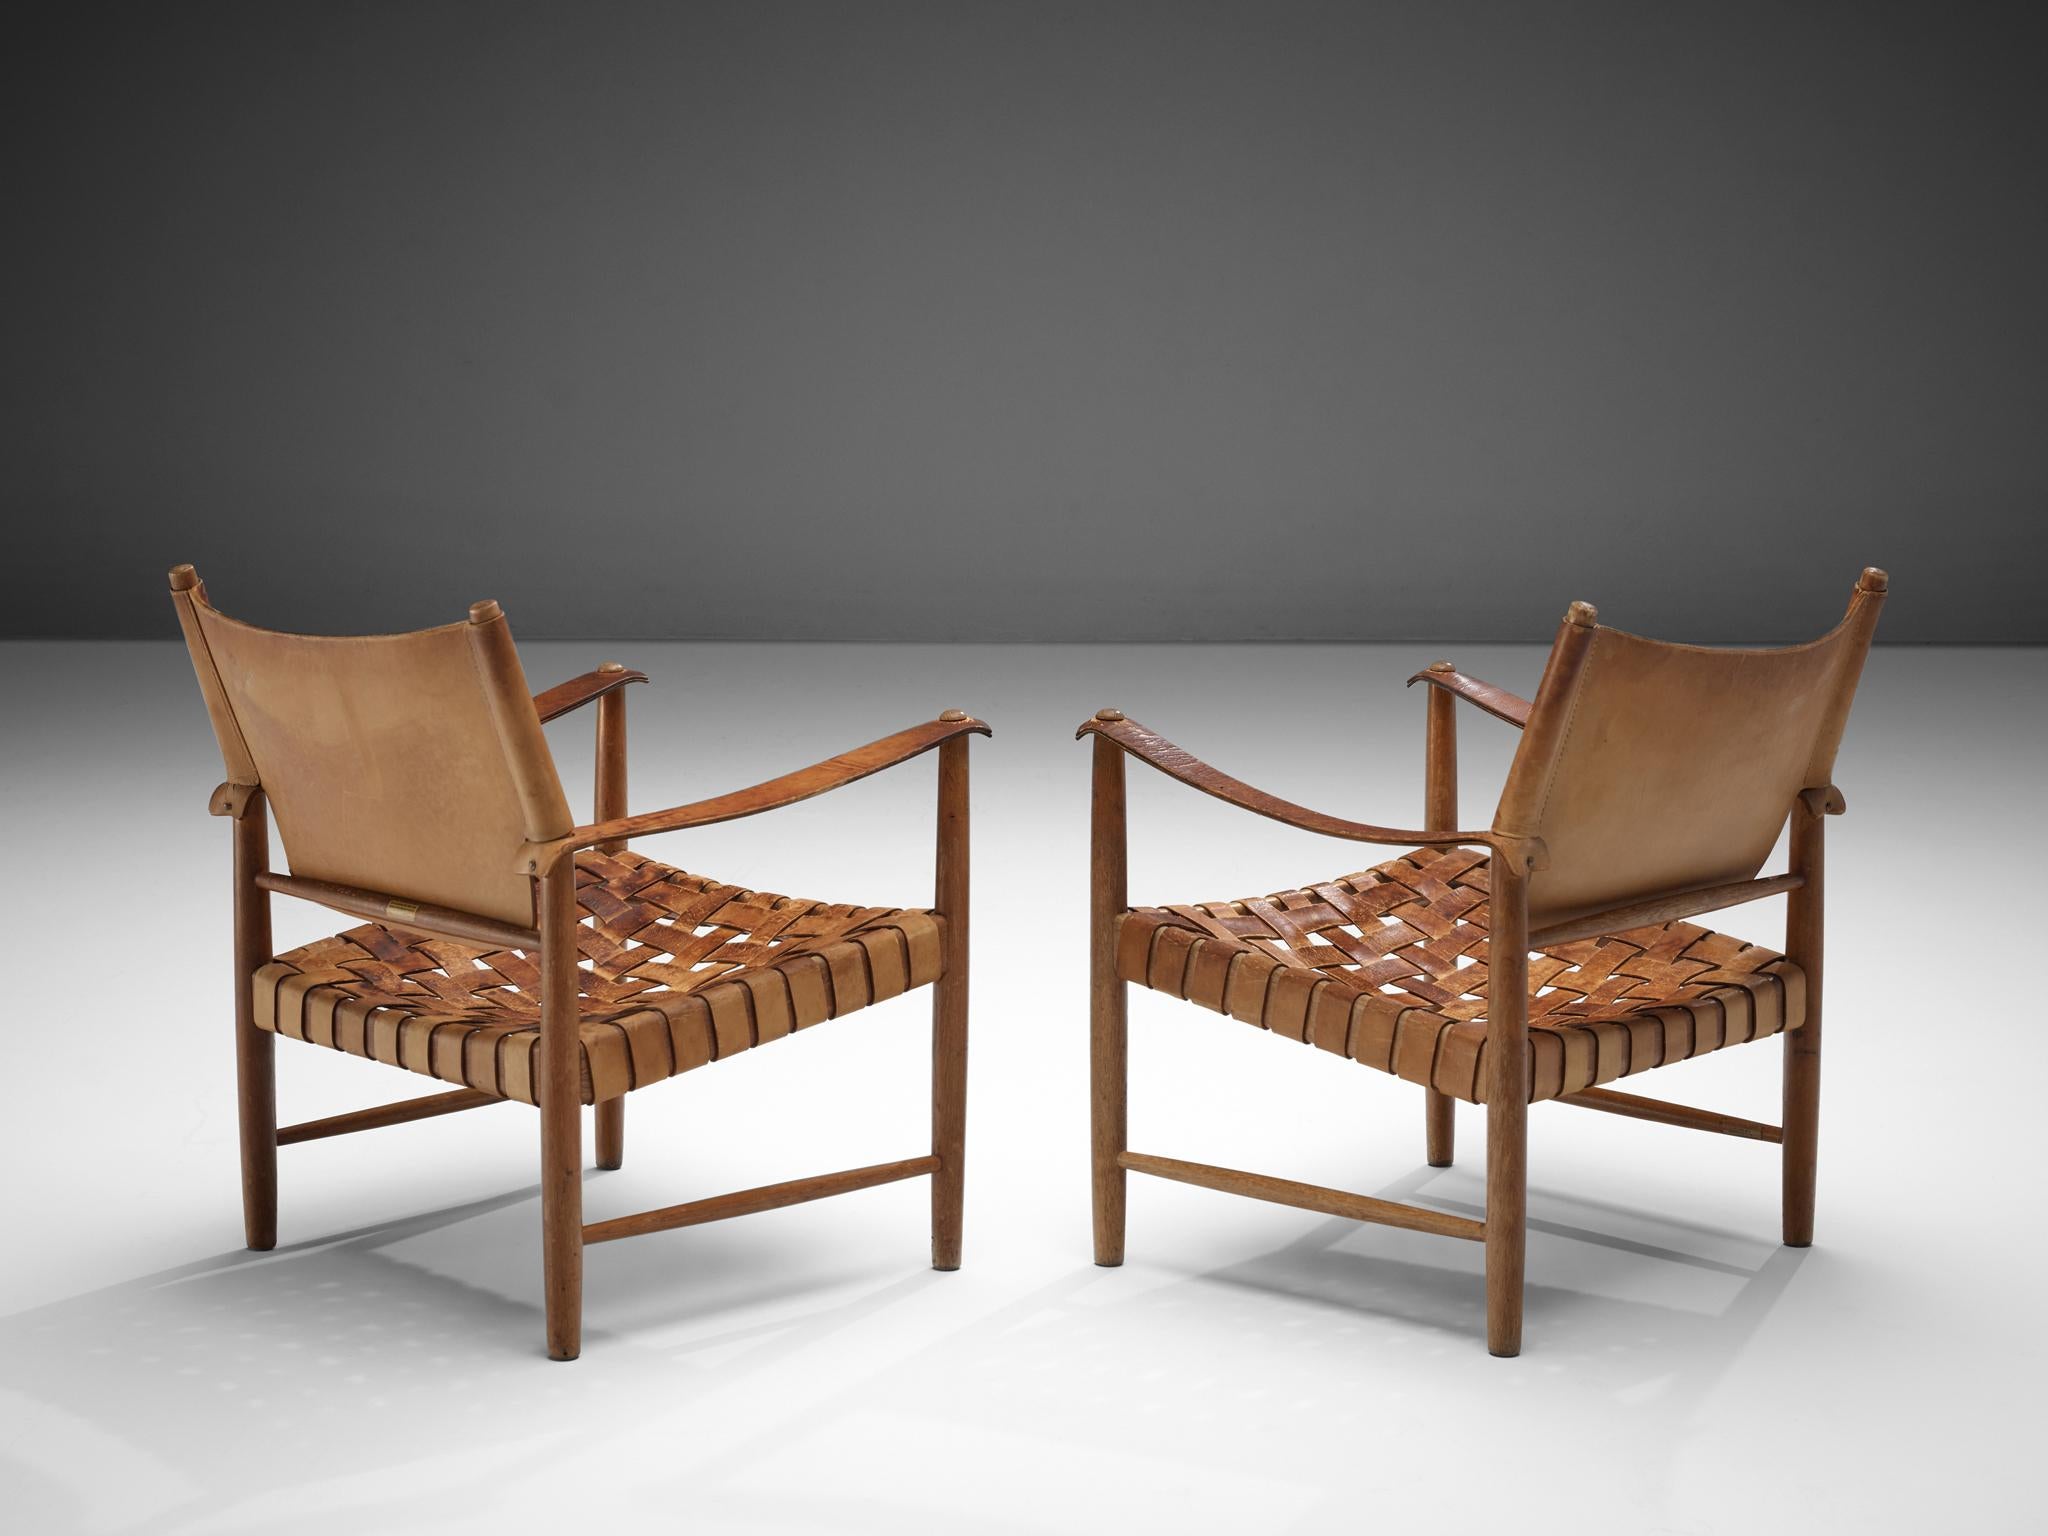 Pair of safari chairs, patinated leather, oak, Denmark, 1950s. 

This elegant pair of safari chairs features wonderful patinated leather on both the seat, the arms and back. The patina creates a lively and lived-in character that is achieved because